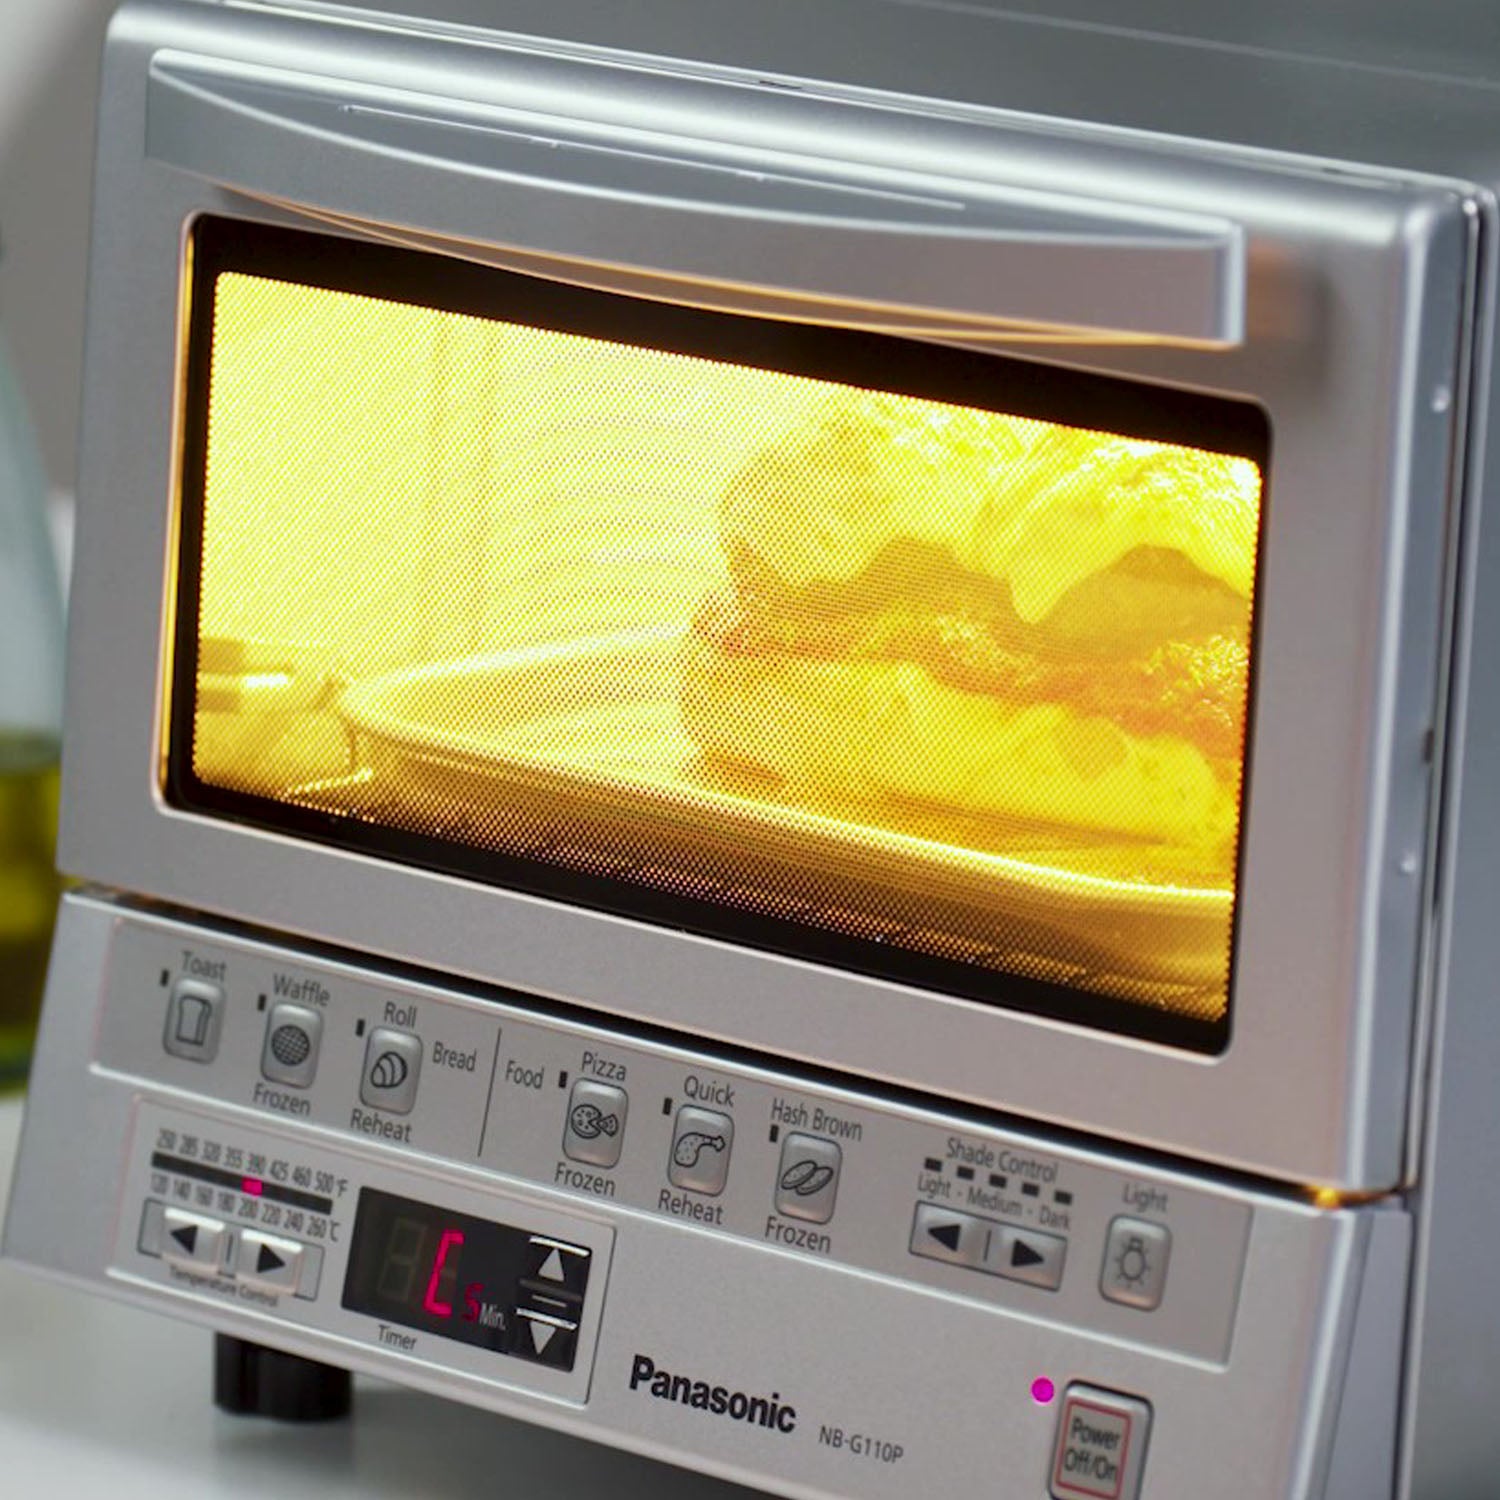 Panasonic NB-G110P Flash Xpress Toaster Oven - Silver for sale online